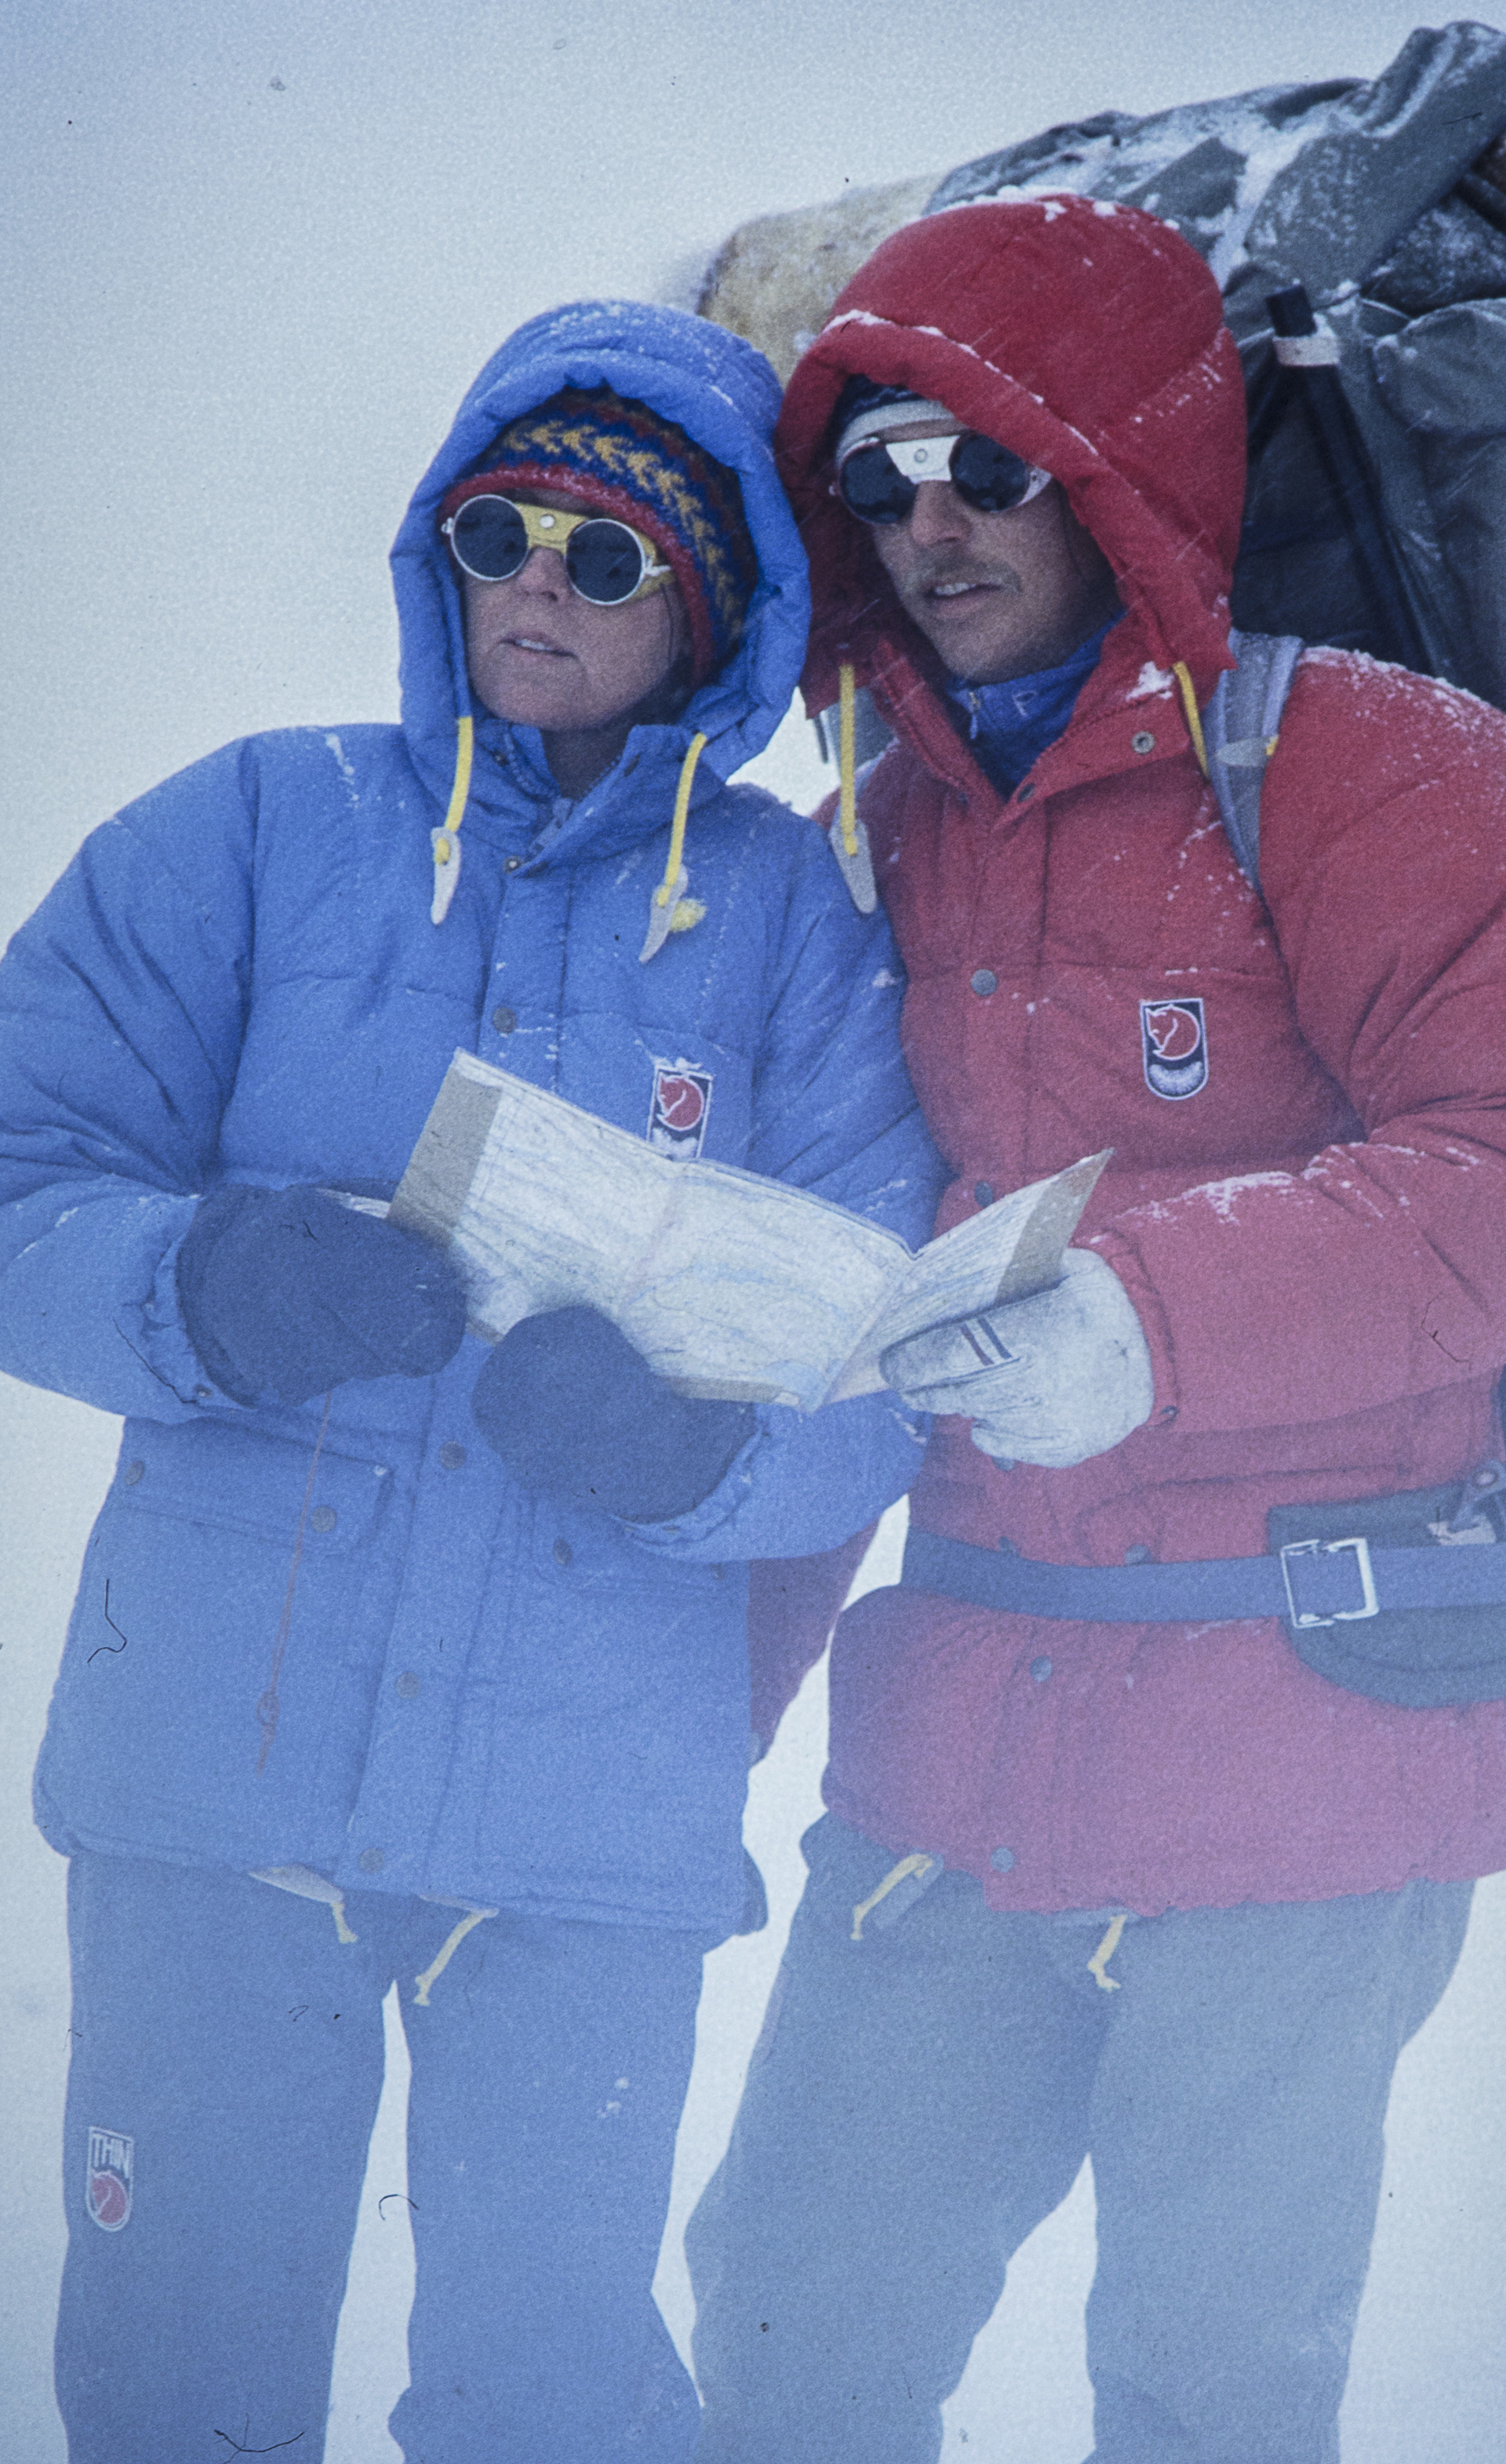 Man and woman in heavy Fjallraven parkas standing together in snow storm reviewing a map with hoods, gloves, and sunglasses on.  